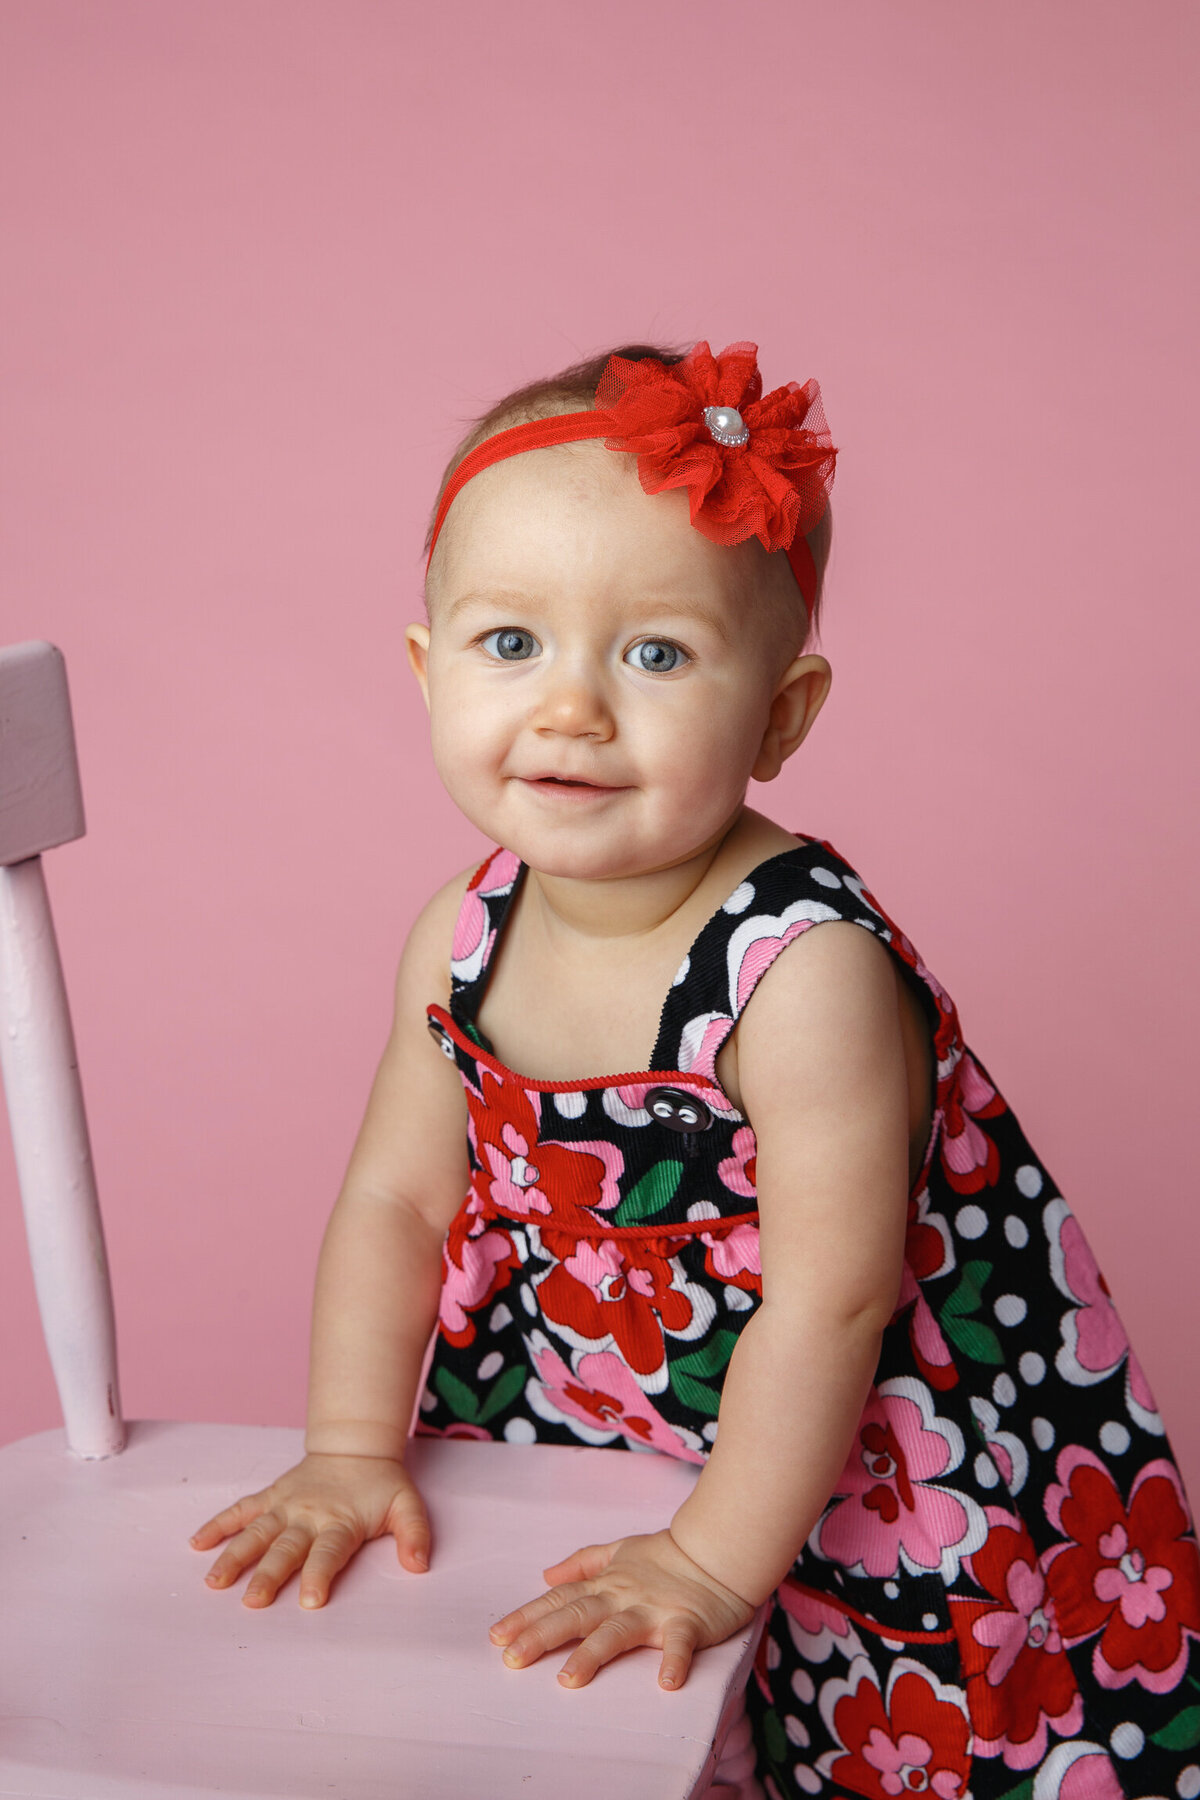 Nine month old toddler holding onto a pink chair for support  being photographed on a pink background